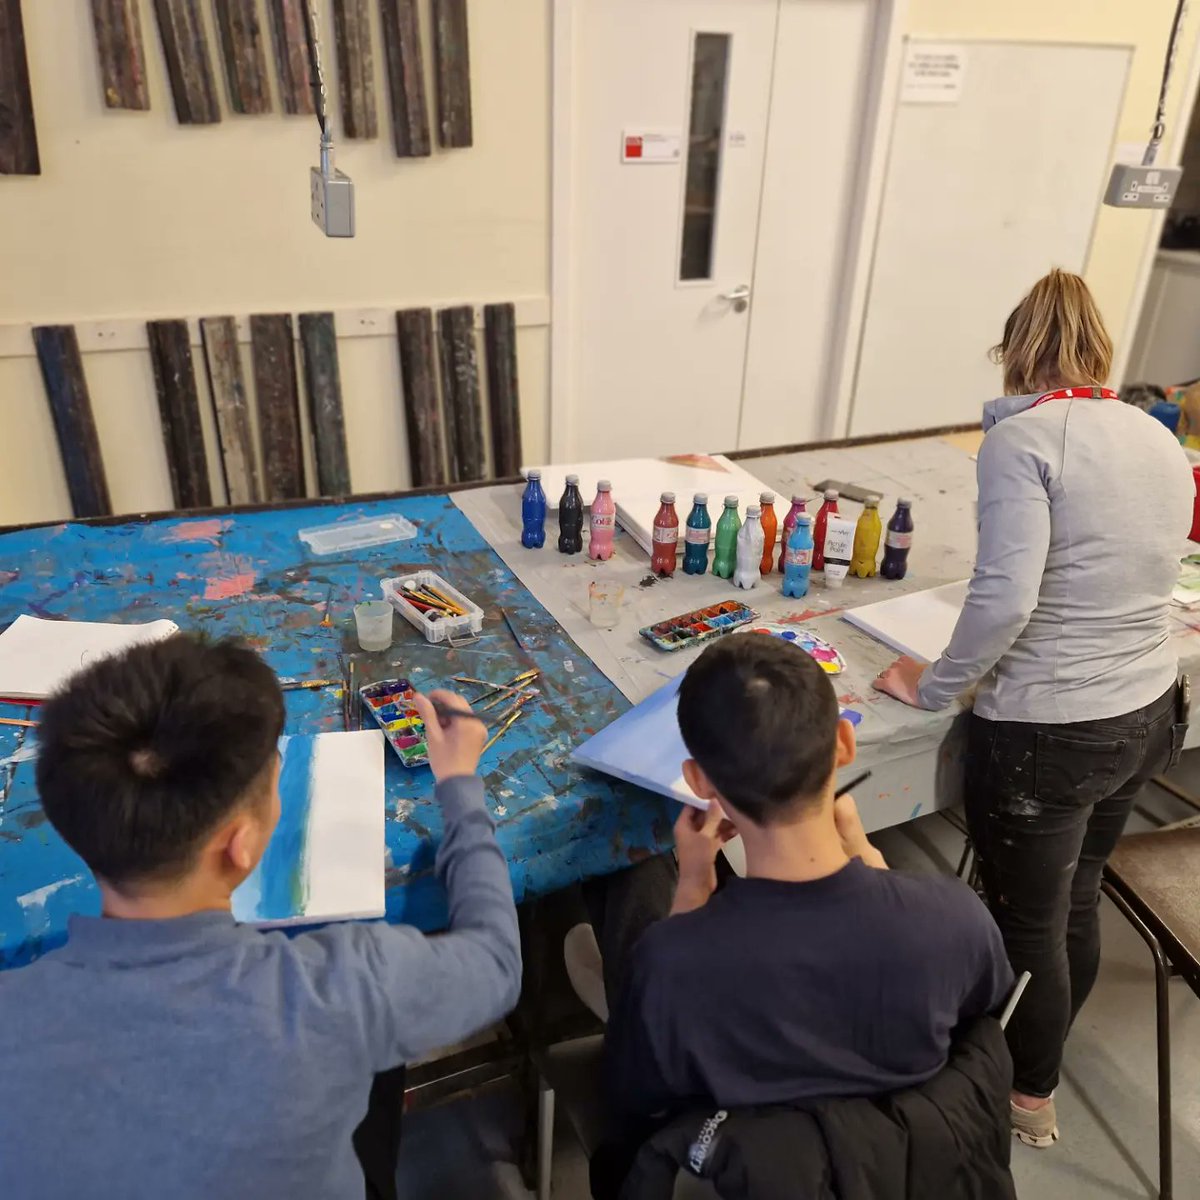 Our art groups are flowing all week! These groups are working within our #arttoheal and #arttoaspire approach. We are super duper happy to see you all! ❤️ #rain 🌧 #wind or #shine 🌞 #art #paint #acrylic #group #focus #present @BdSchoolofArt @BradfordCollege @HortonHousing